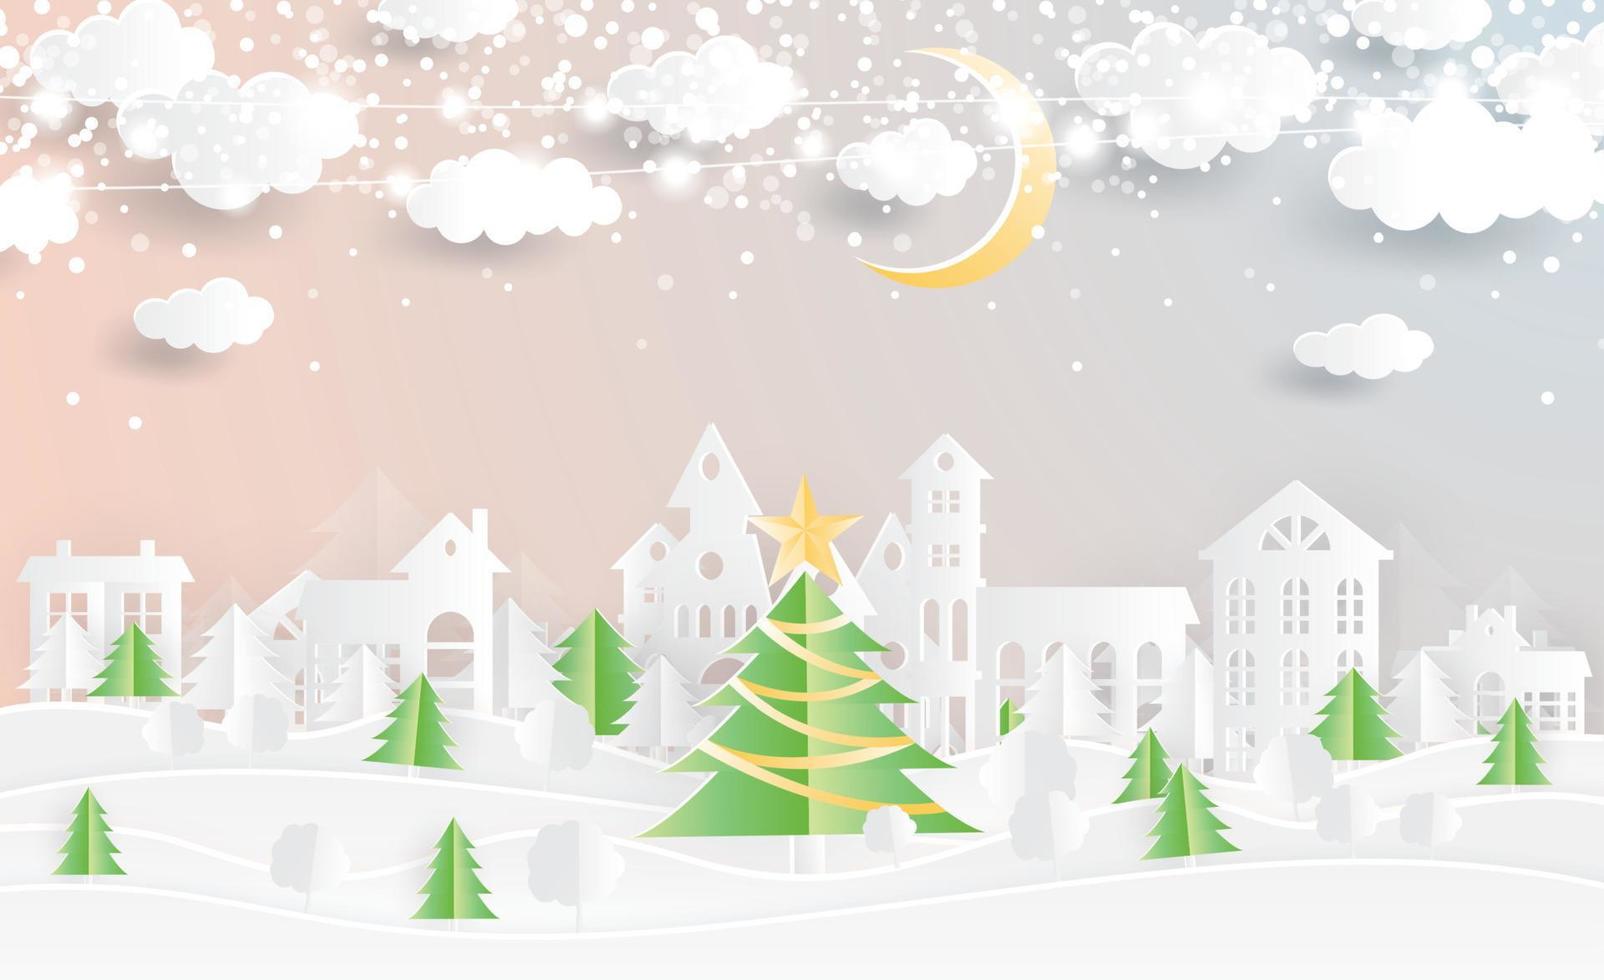 Christmas Village and Christmas Tree in Paper Cut Style. vector